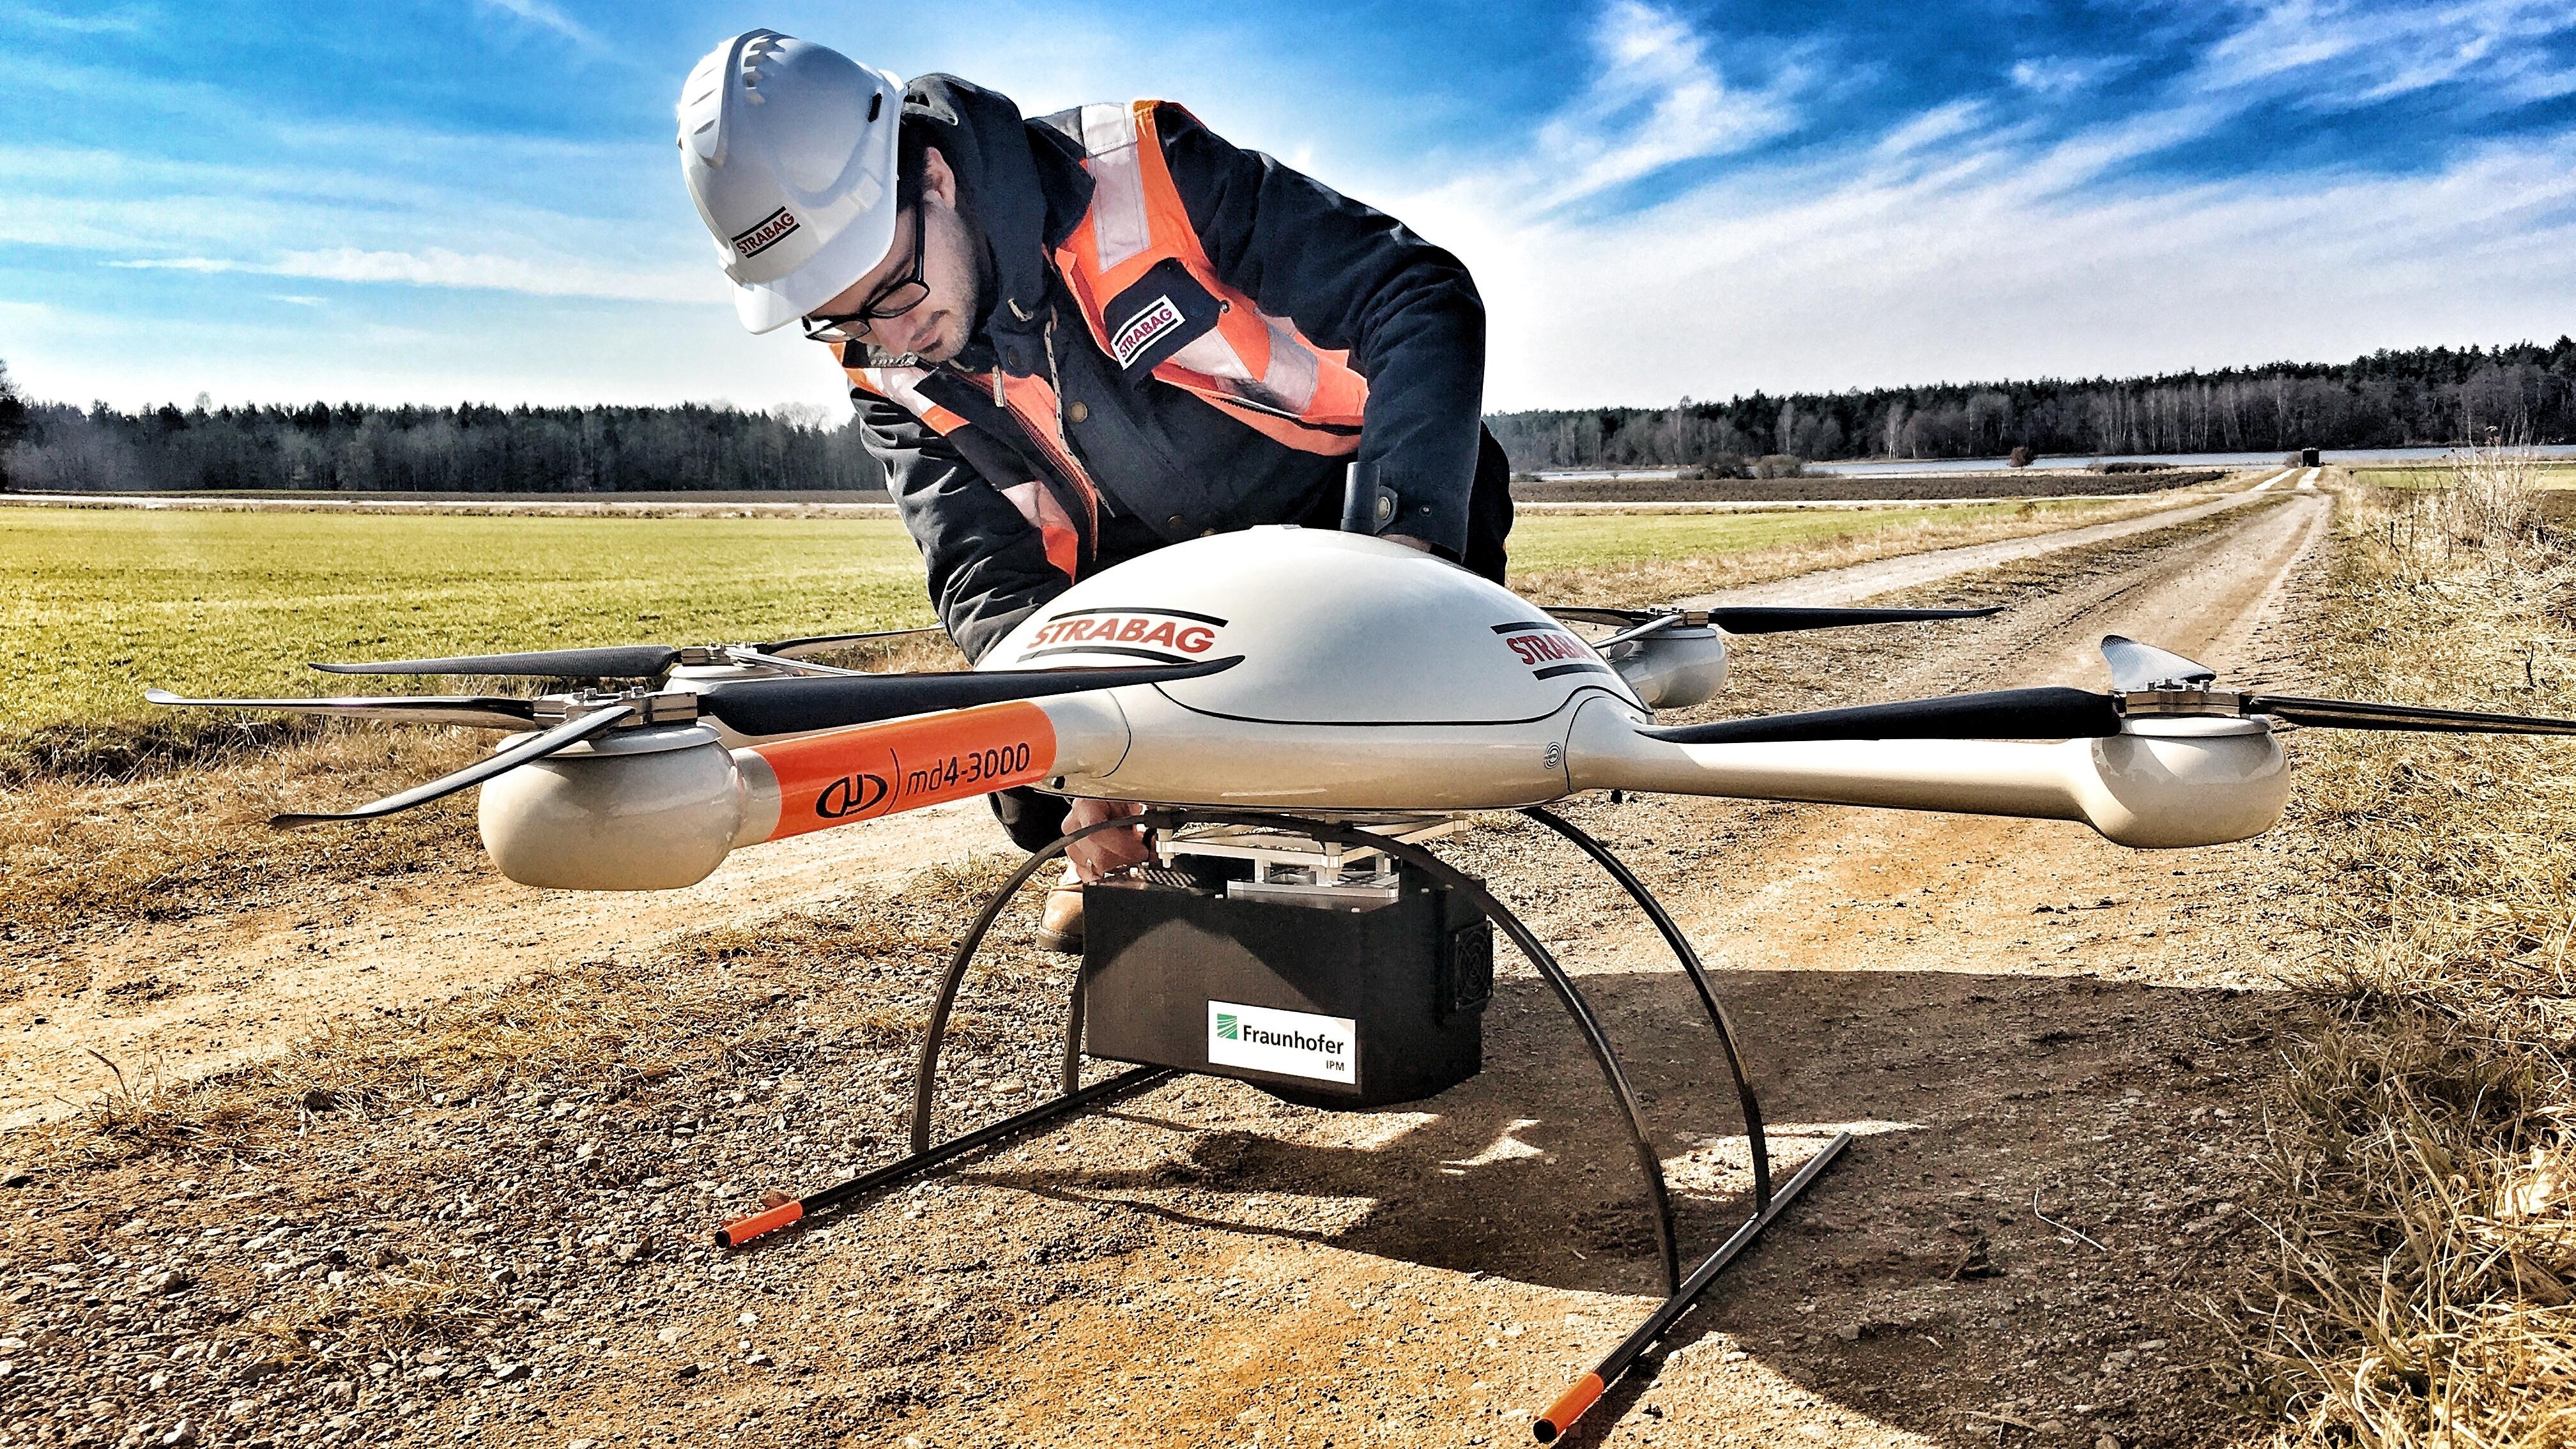 Strabag uses Pix4D drone mapping software for their construction projects